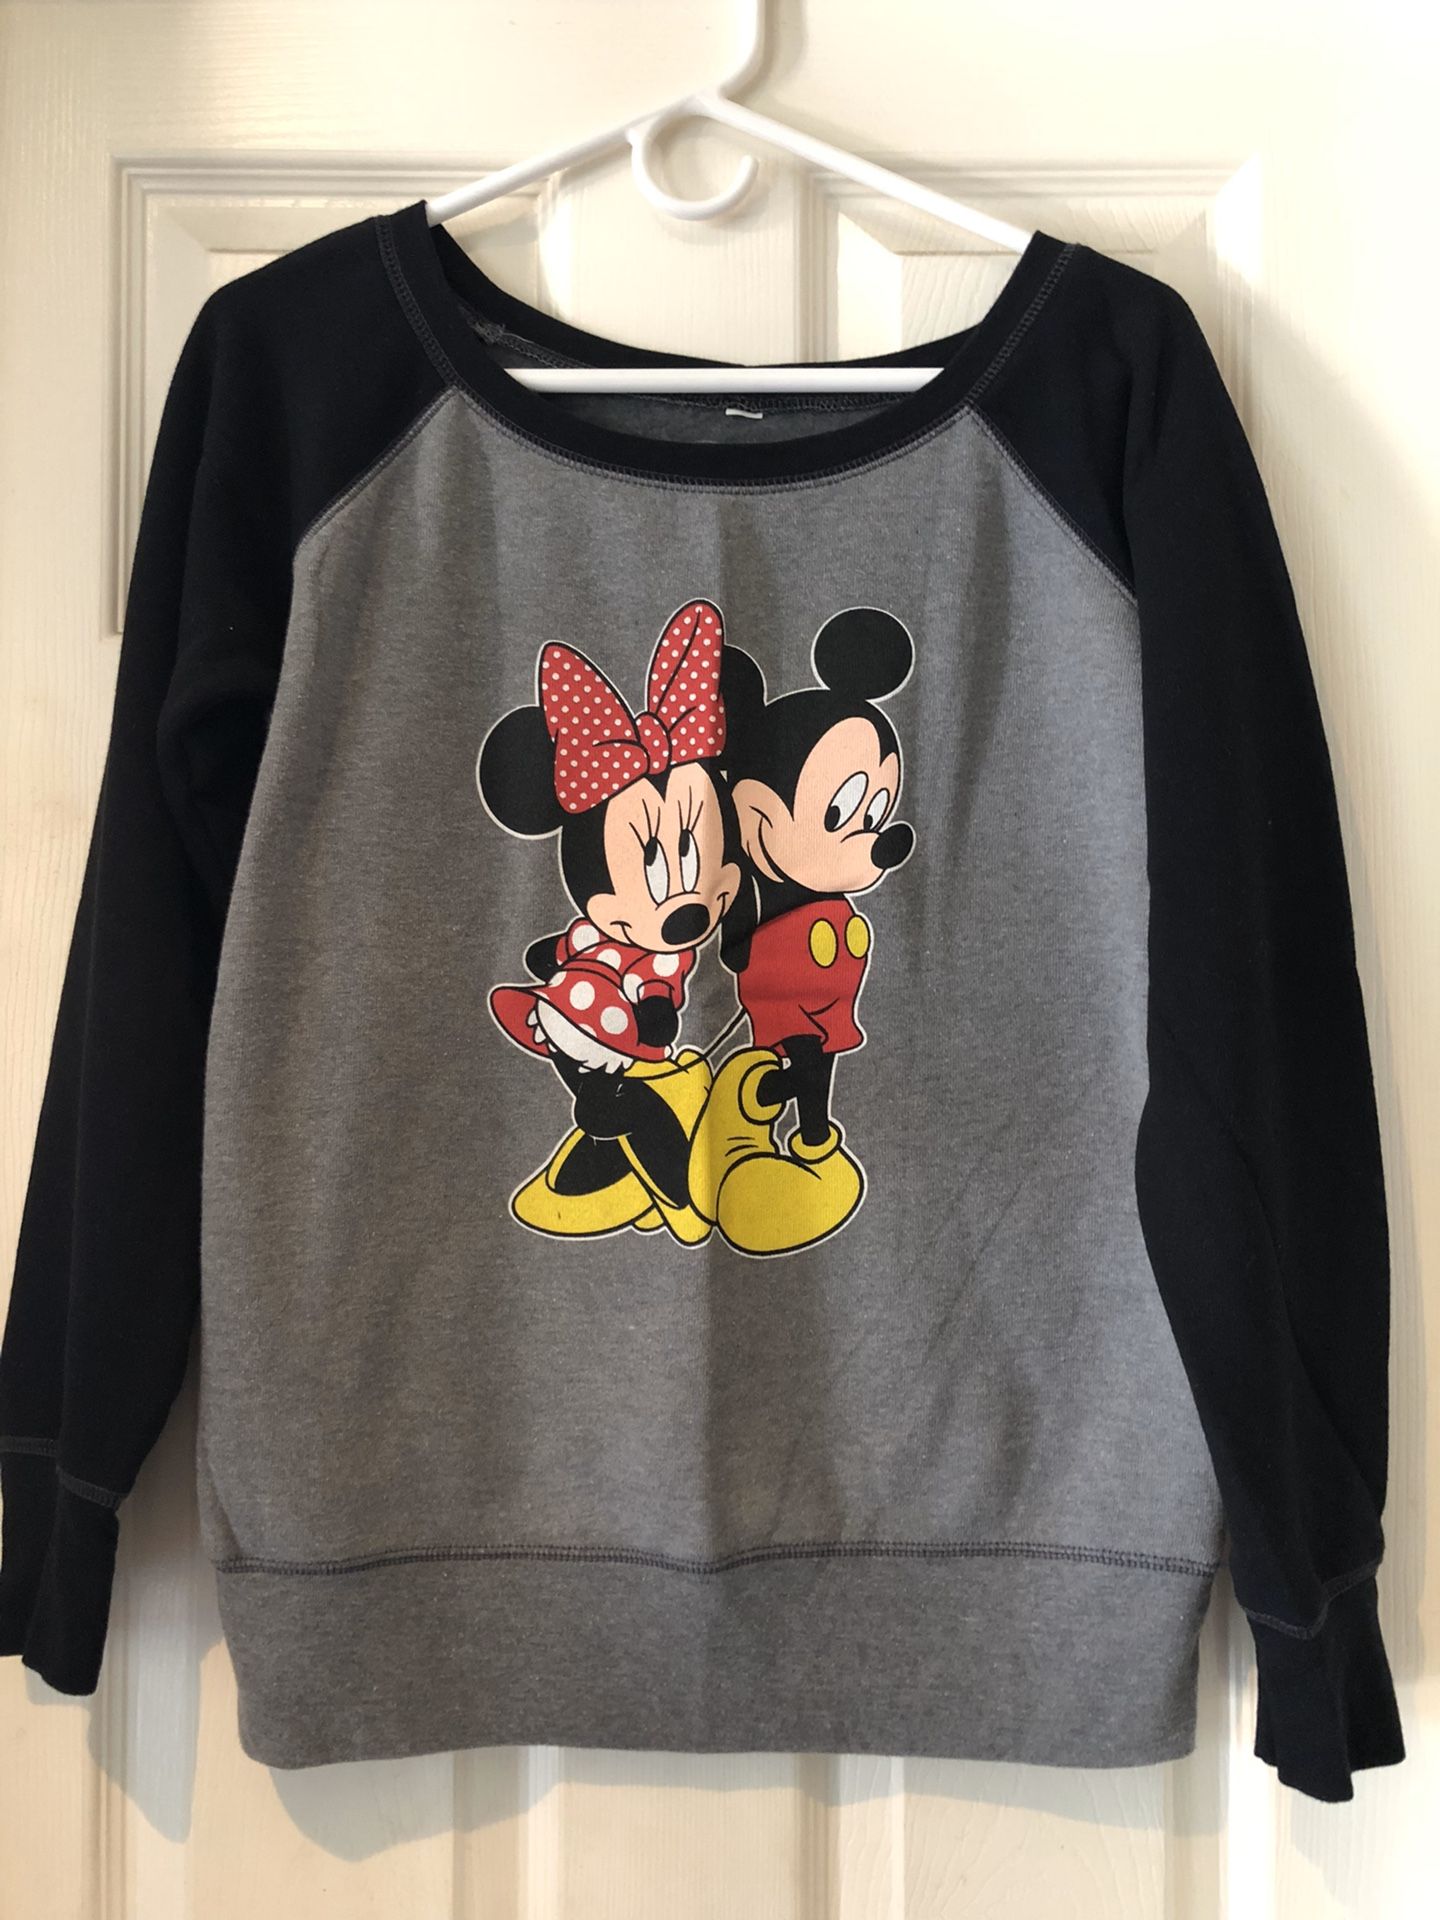 Disney Mickey and Minnie sweater New woman's size large